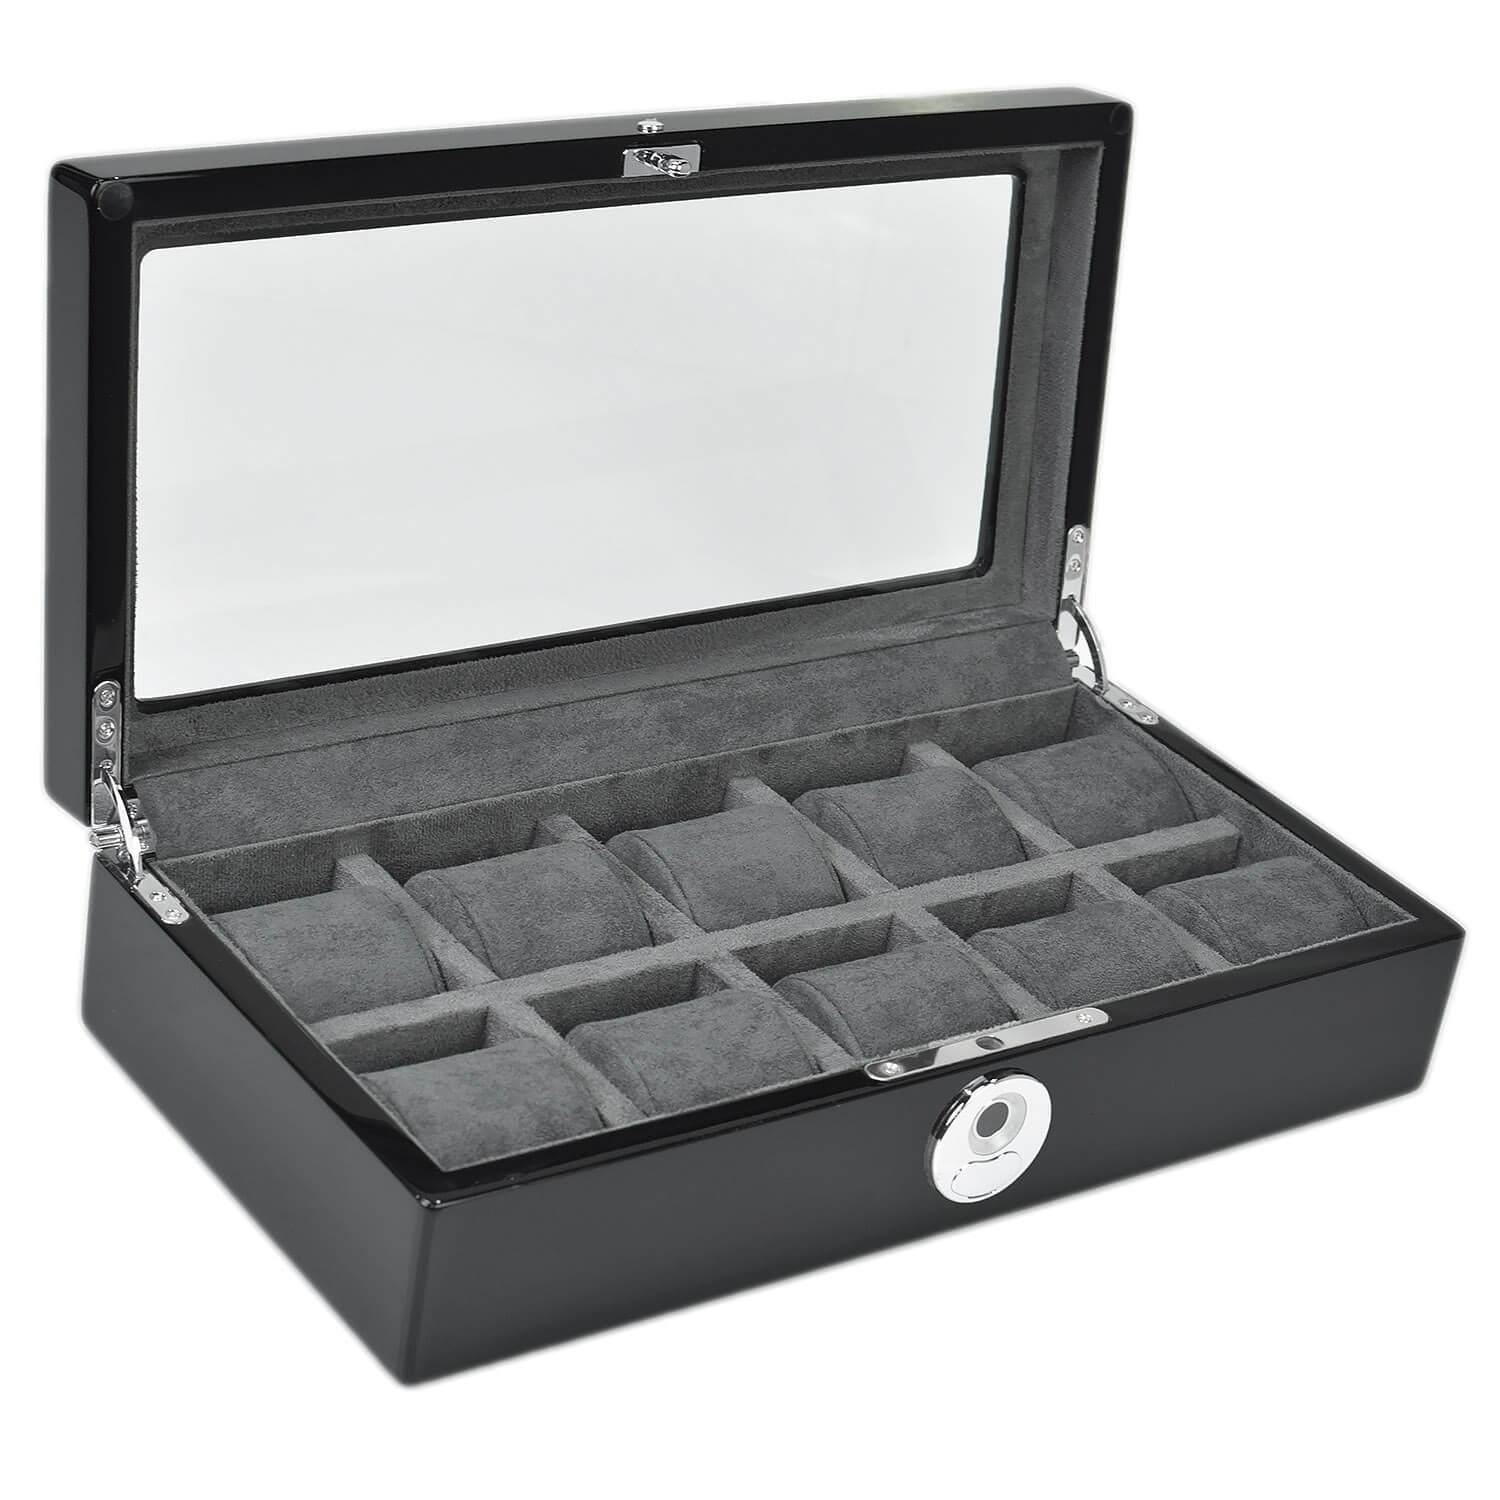 Watch Box in Black Piano Finish with BioMetric Lock Glass Lid for 10 Watches